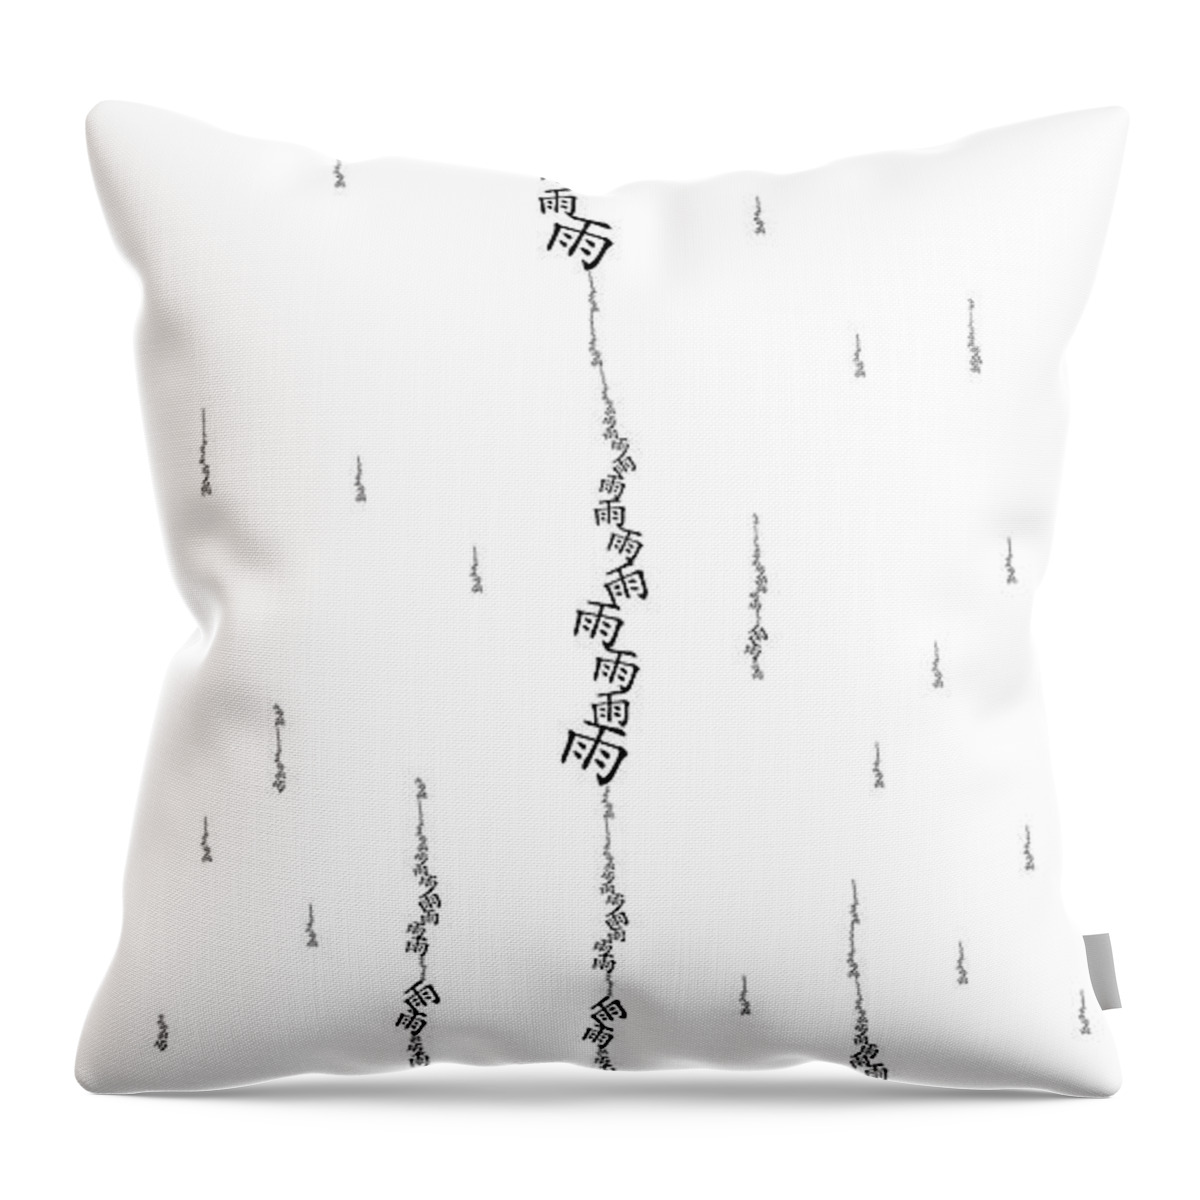 Abstract Throw Pillow featuring the digital art Umbrella by Fei A